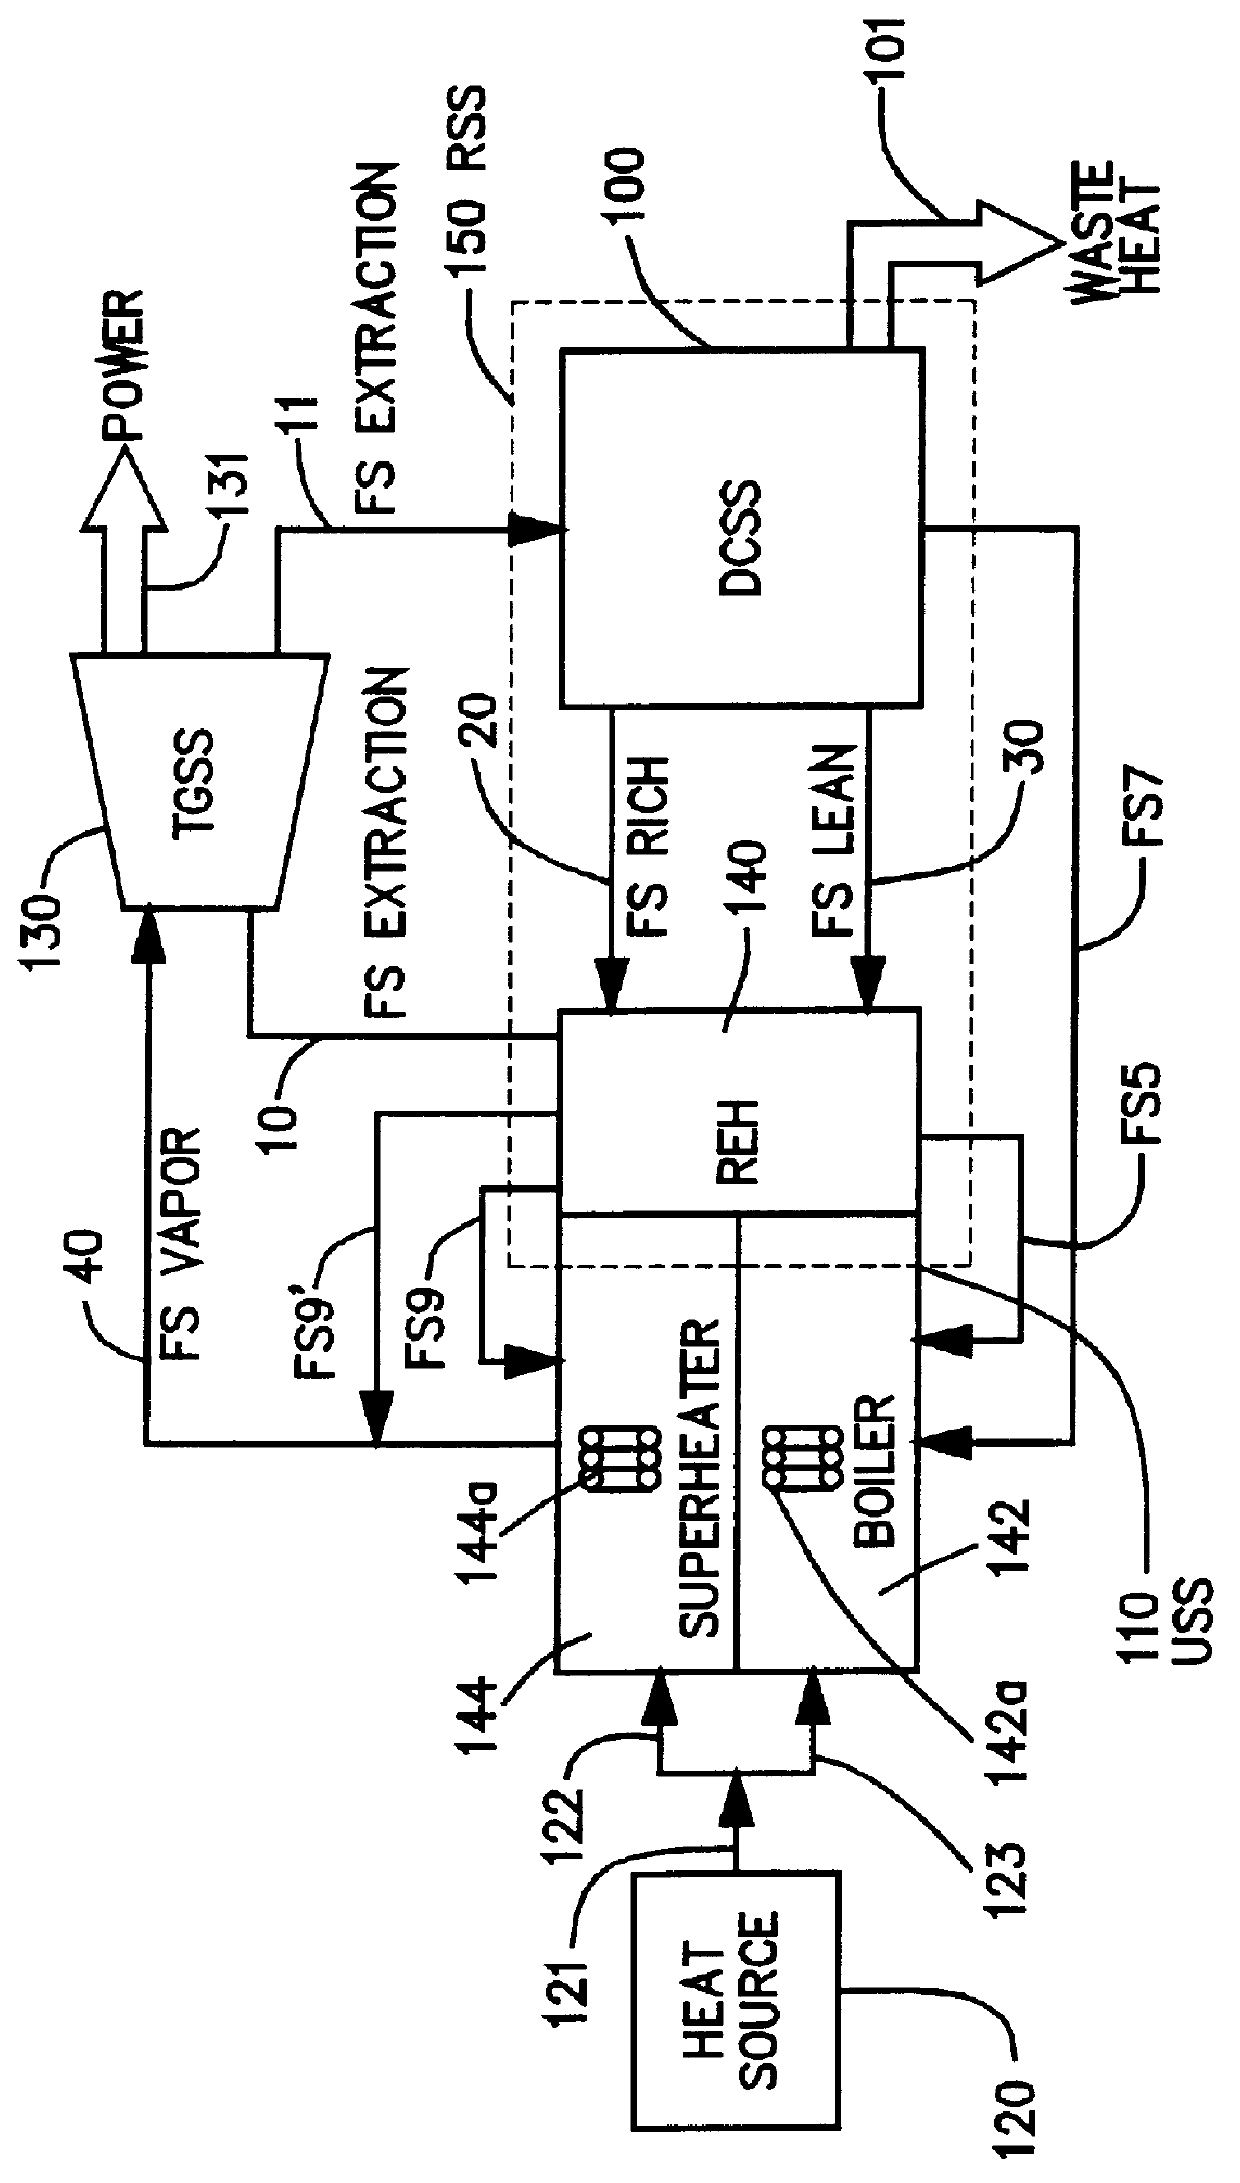 Technique for controlling regenerative system condensation level due to changing conditions in a Kalina cycle power generation system